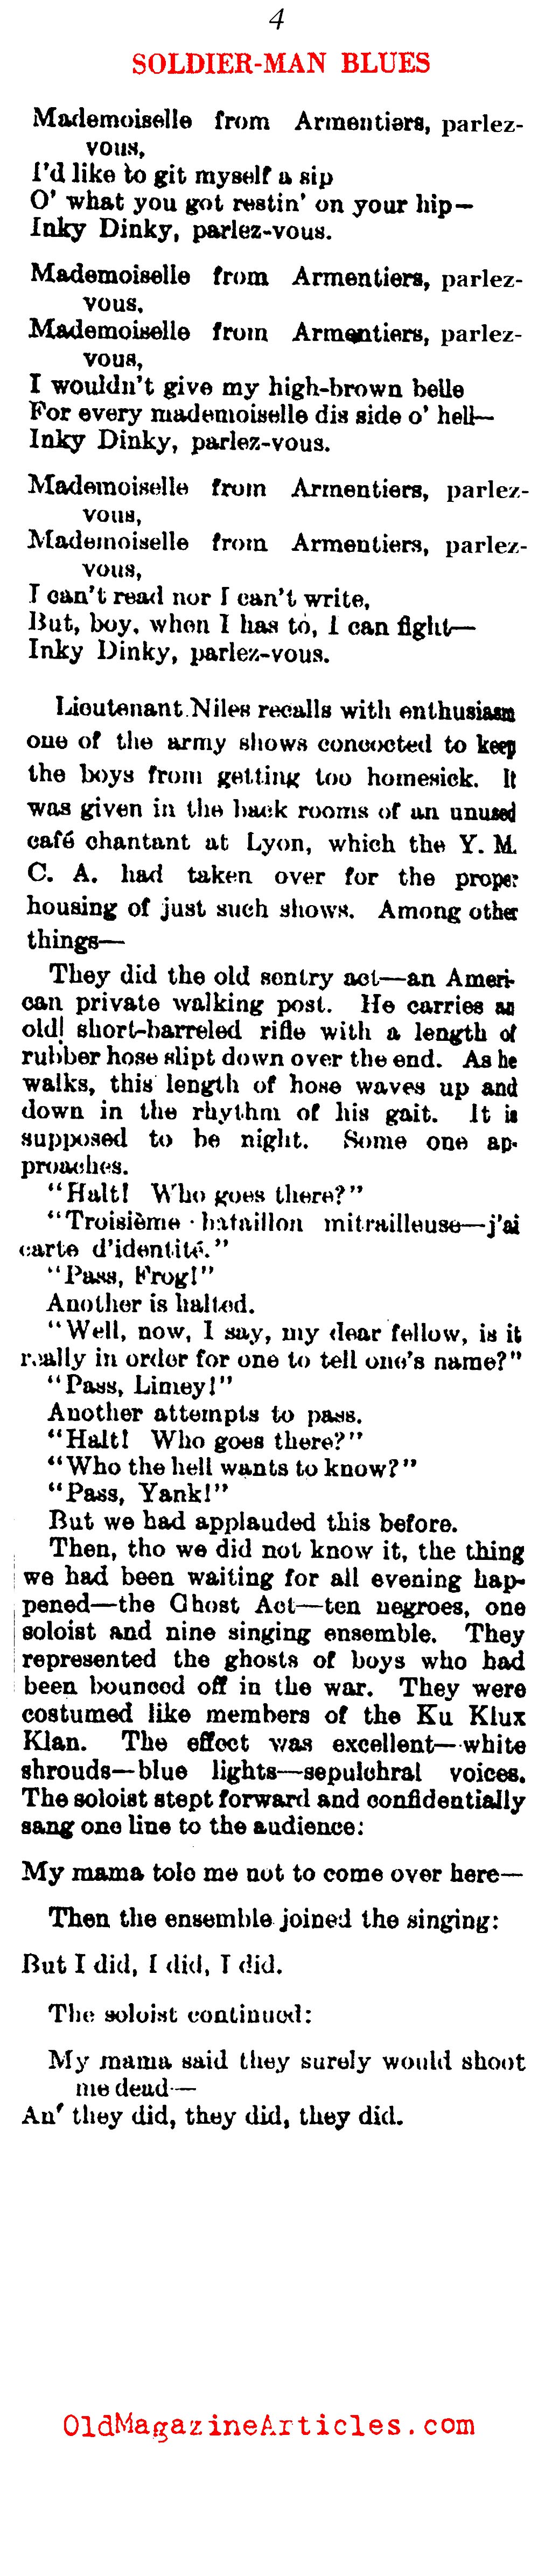 ''Soldier Man Blues from Somewhere in France'' (Literary Digest, 1927)